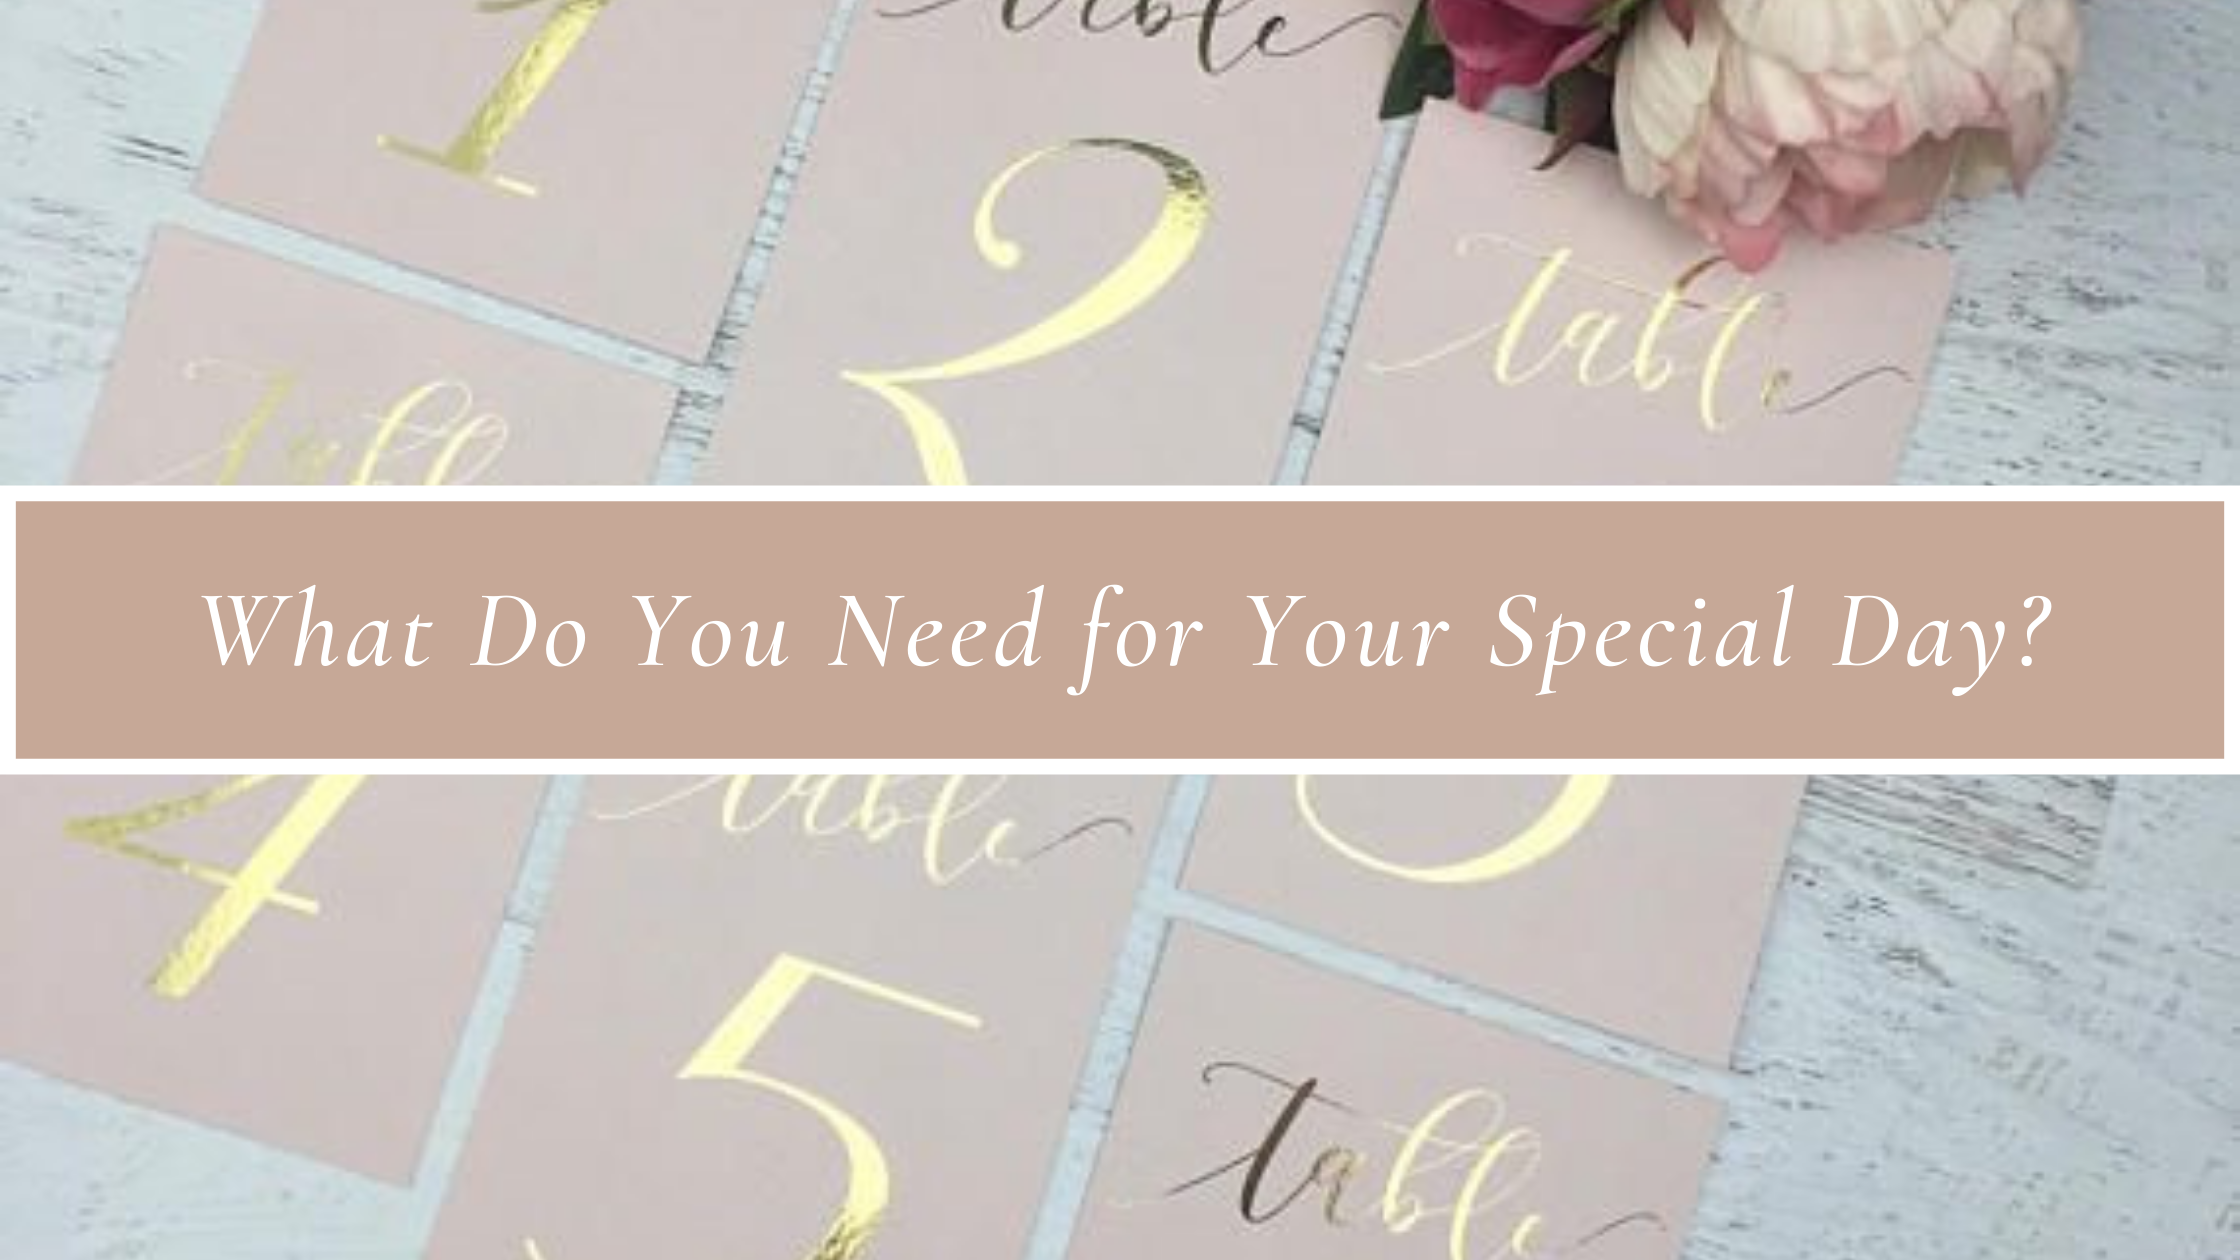 What Do You Need for Your Special Day?